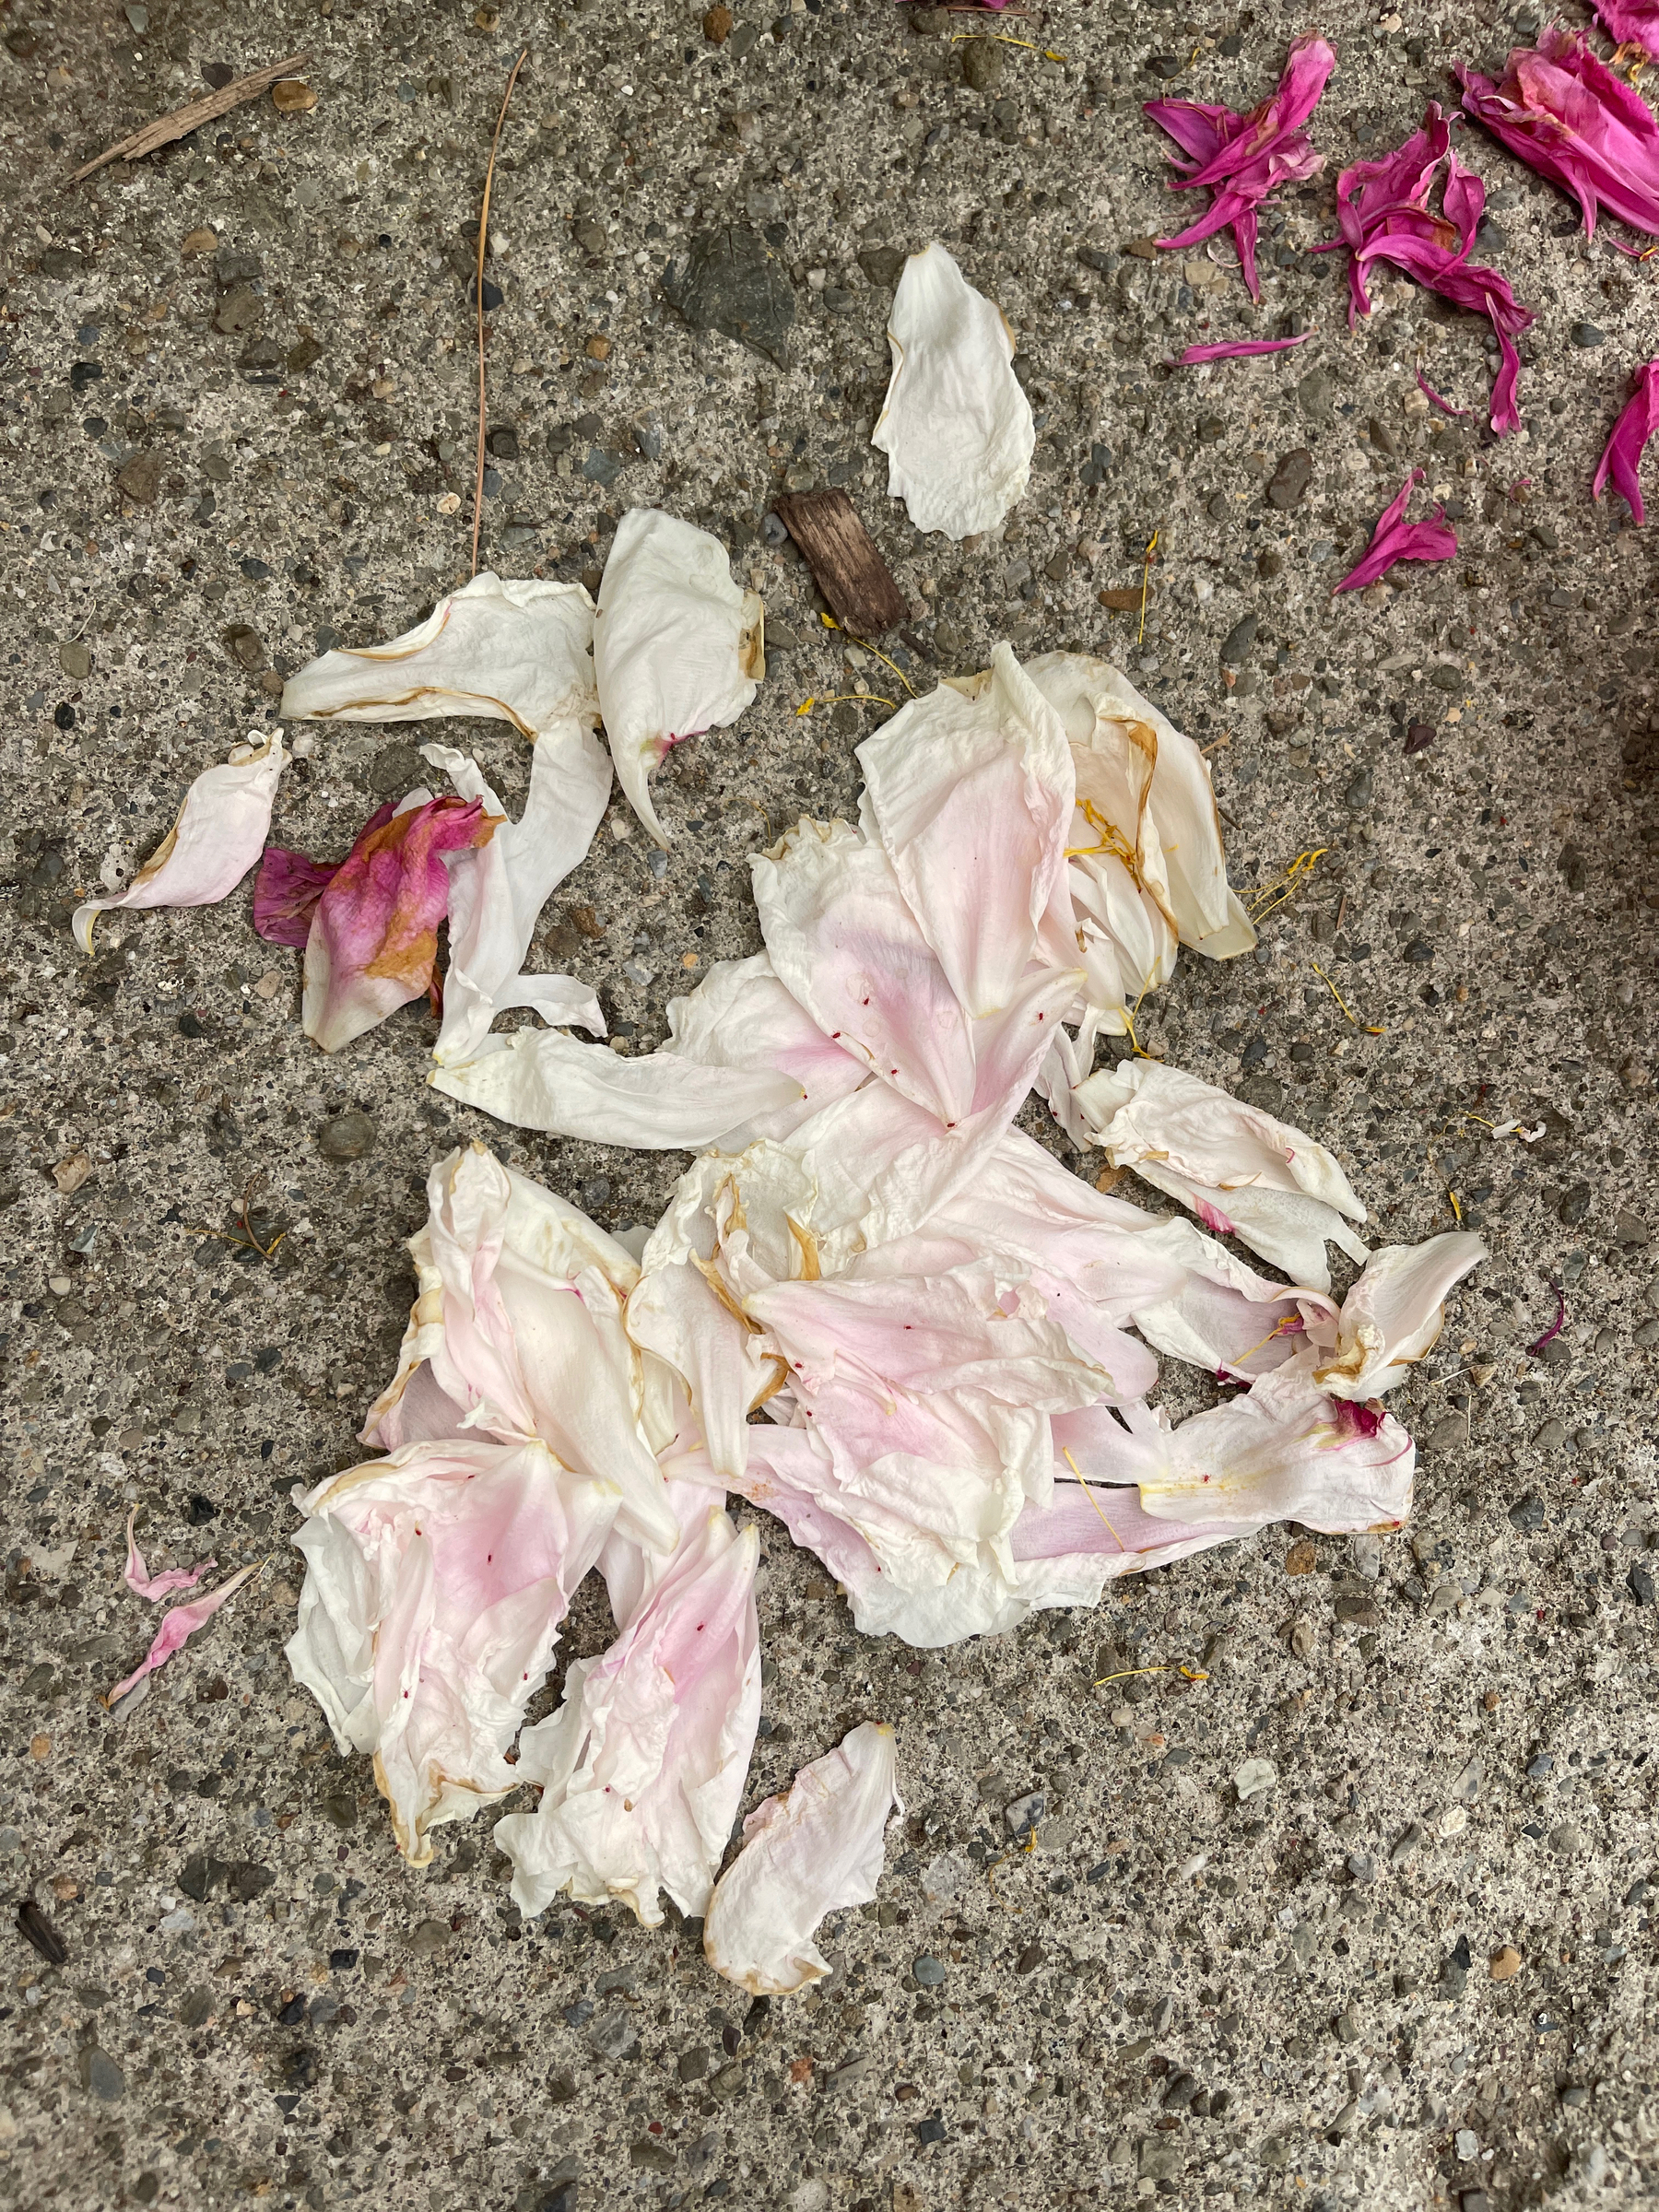 Petals from a peony on the sidewalk.